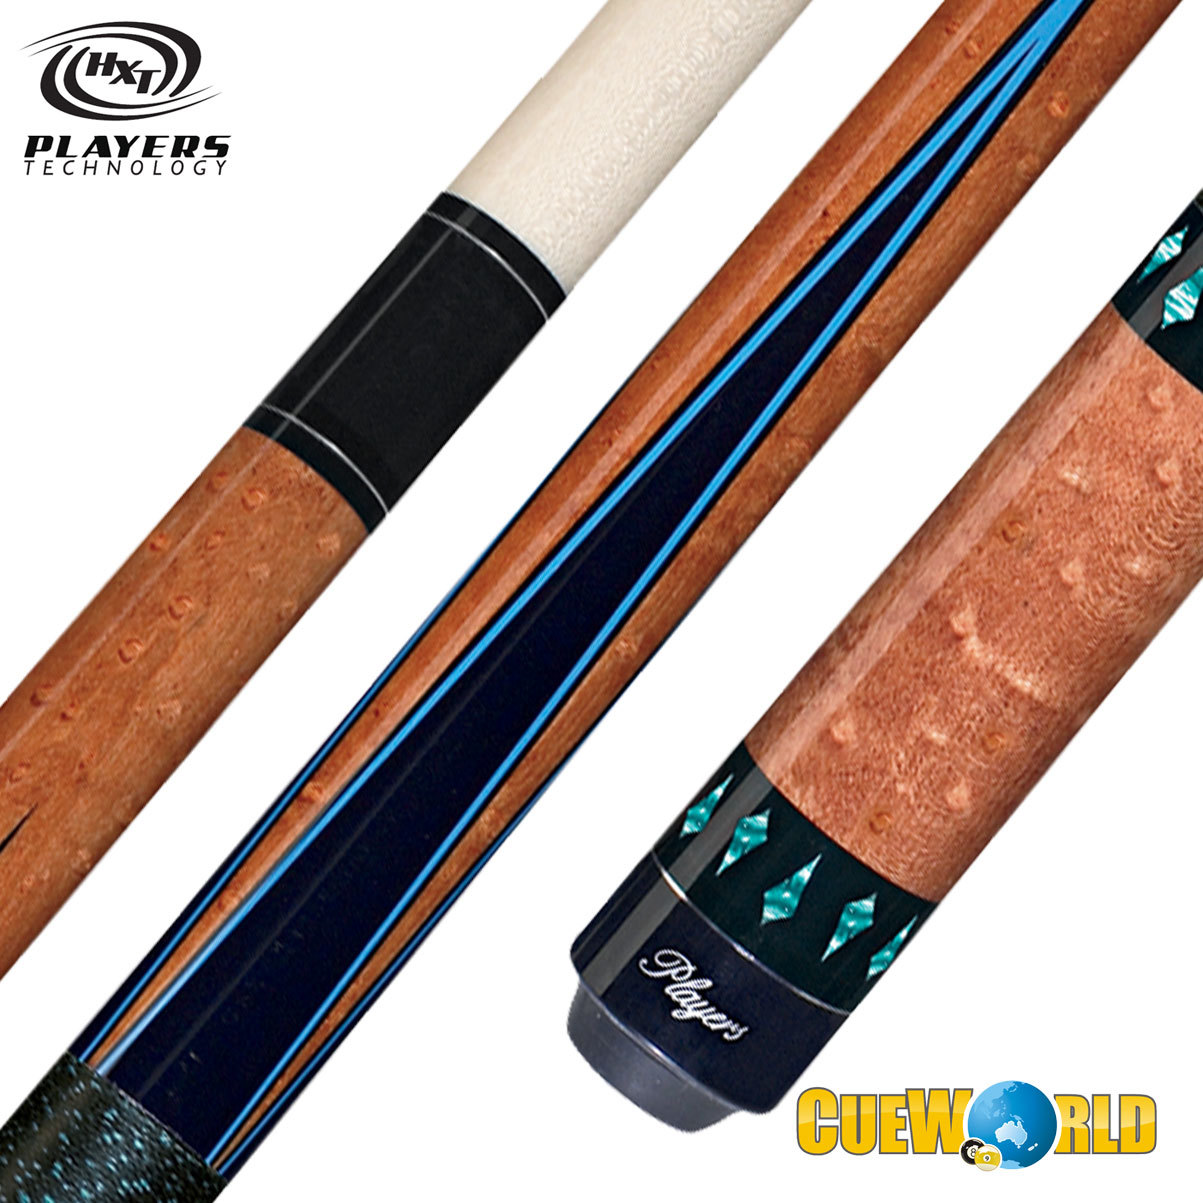 Players Technology Series HXT30 Pool Cue Style 21 oz.